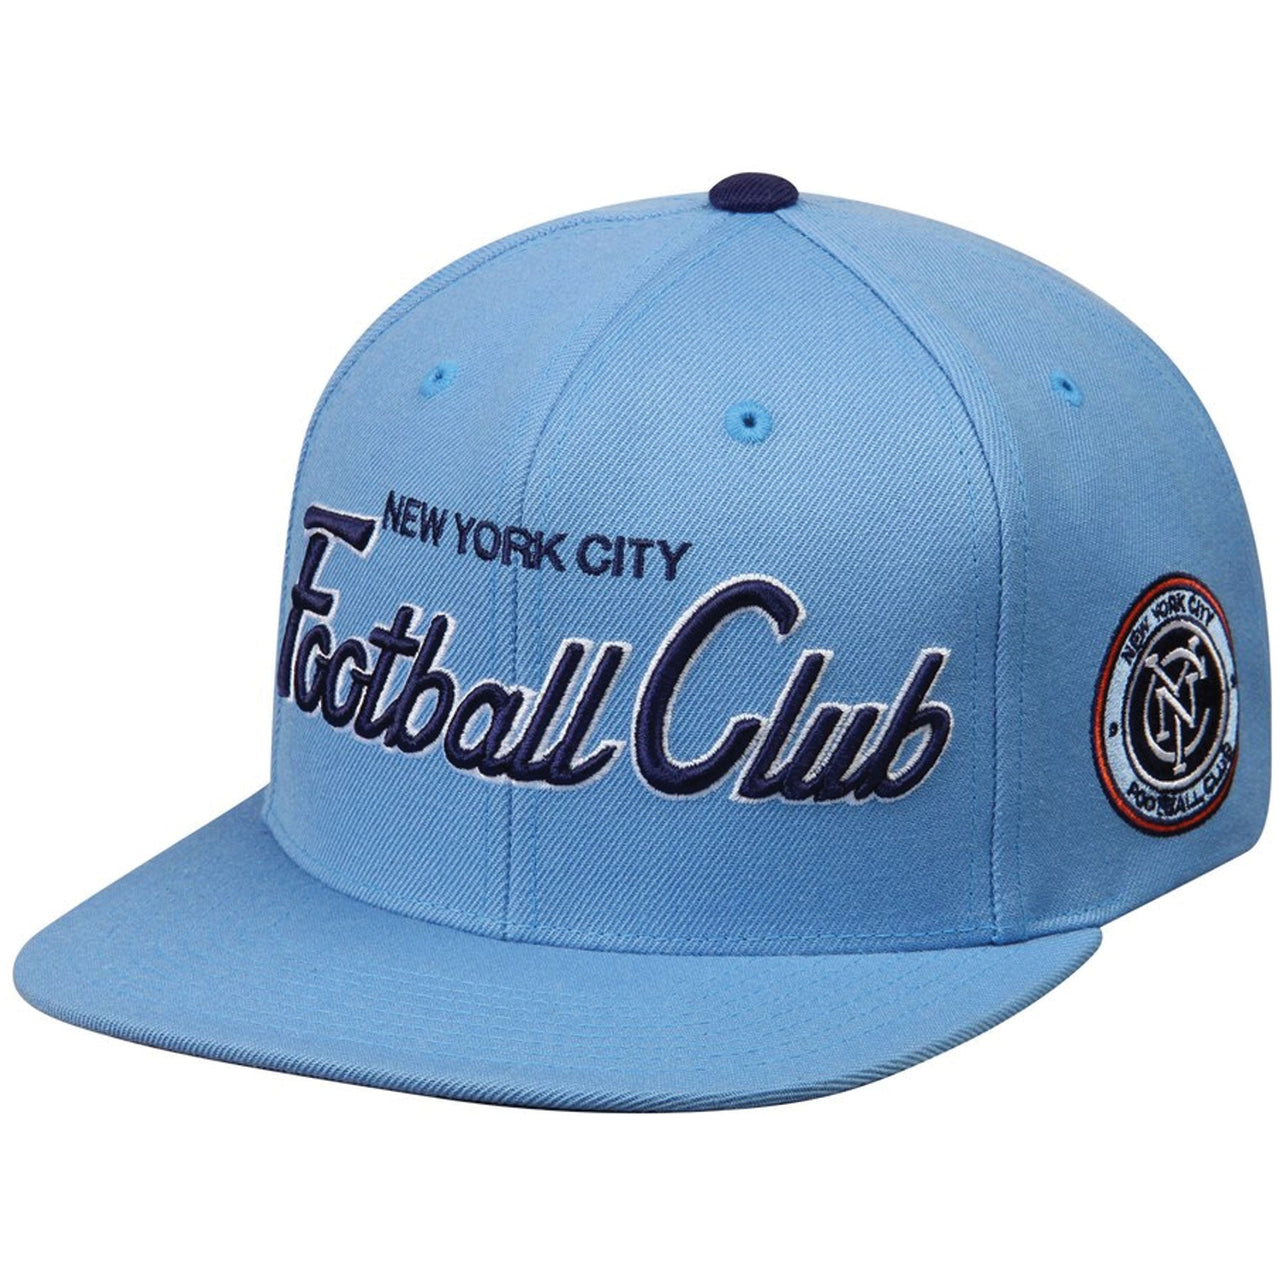 New York City Football Club Special Script Mitchell and Ness Snapback Hat